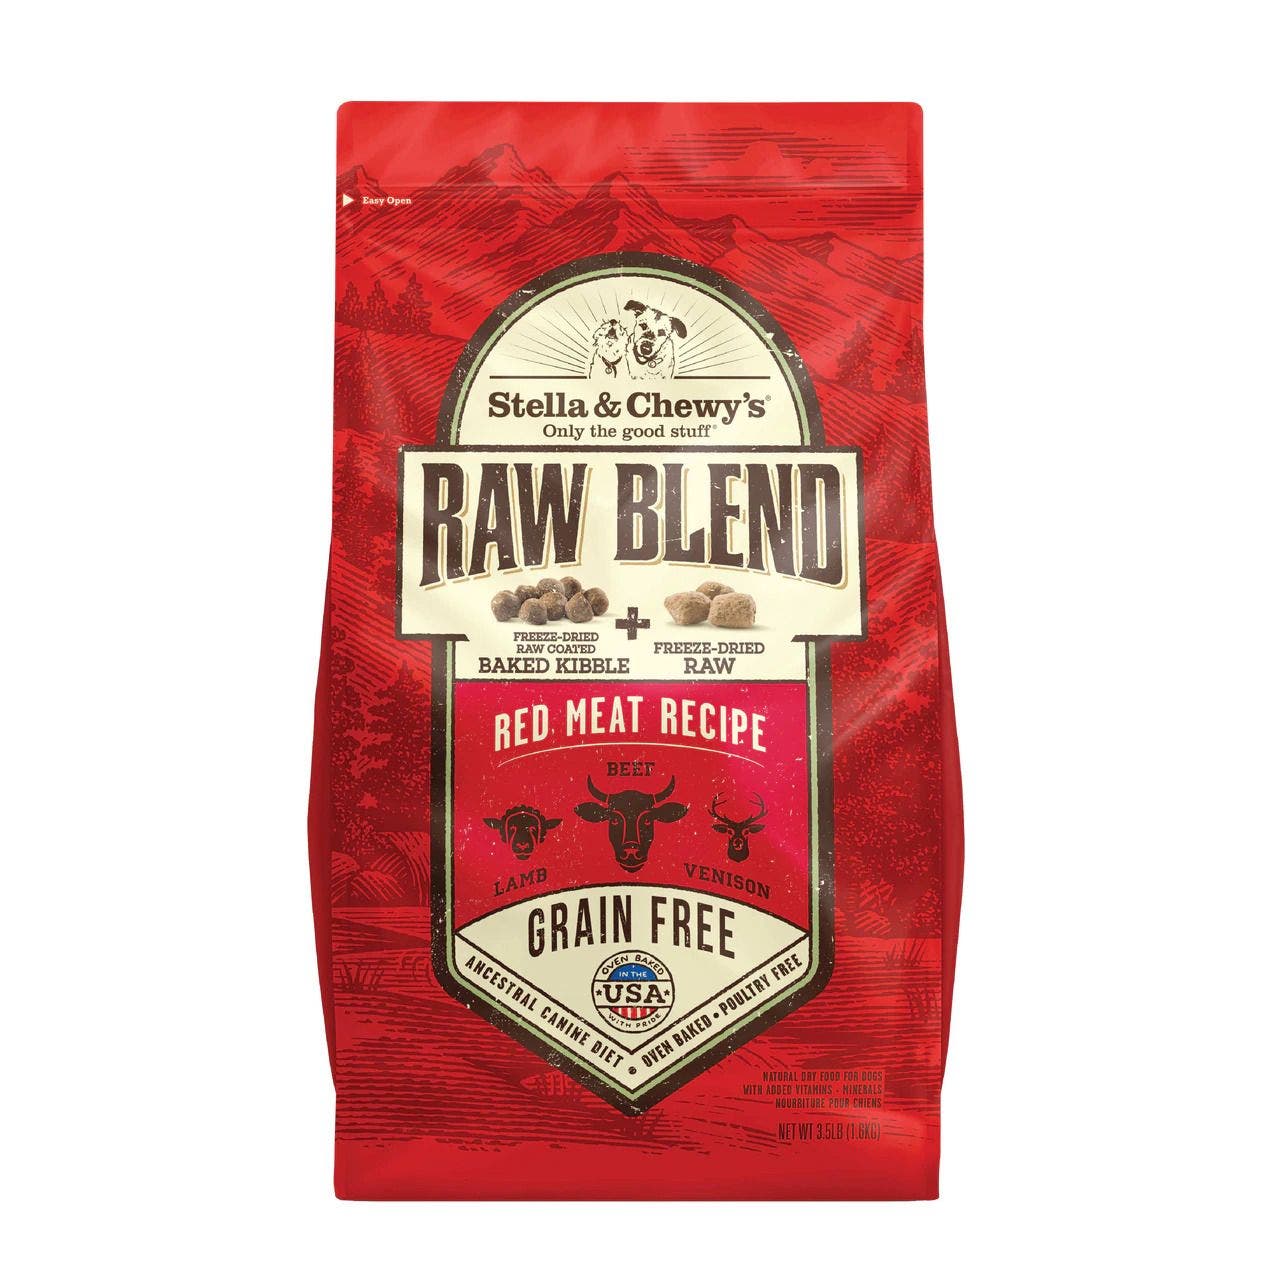 Stella and Chewy's 10lb raw blend red meat recipe dog food